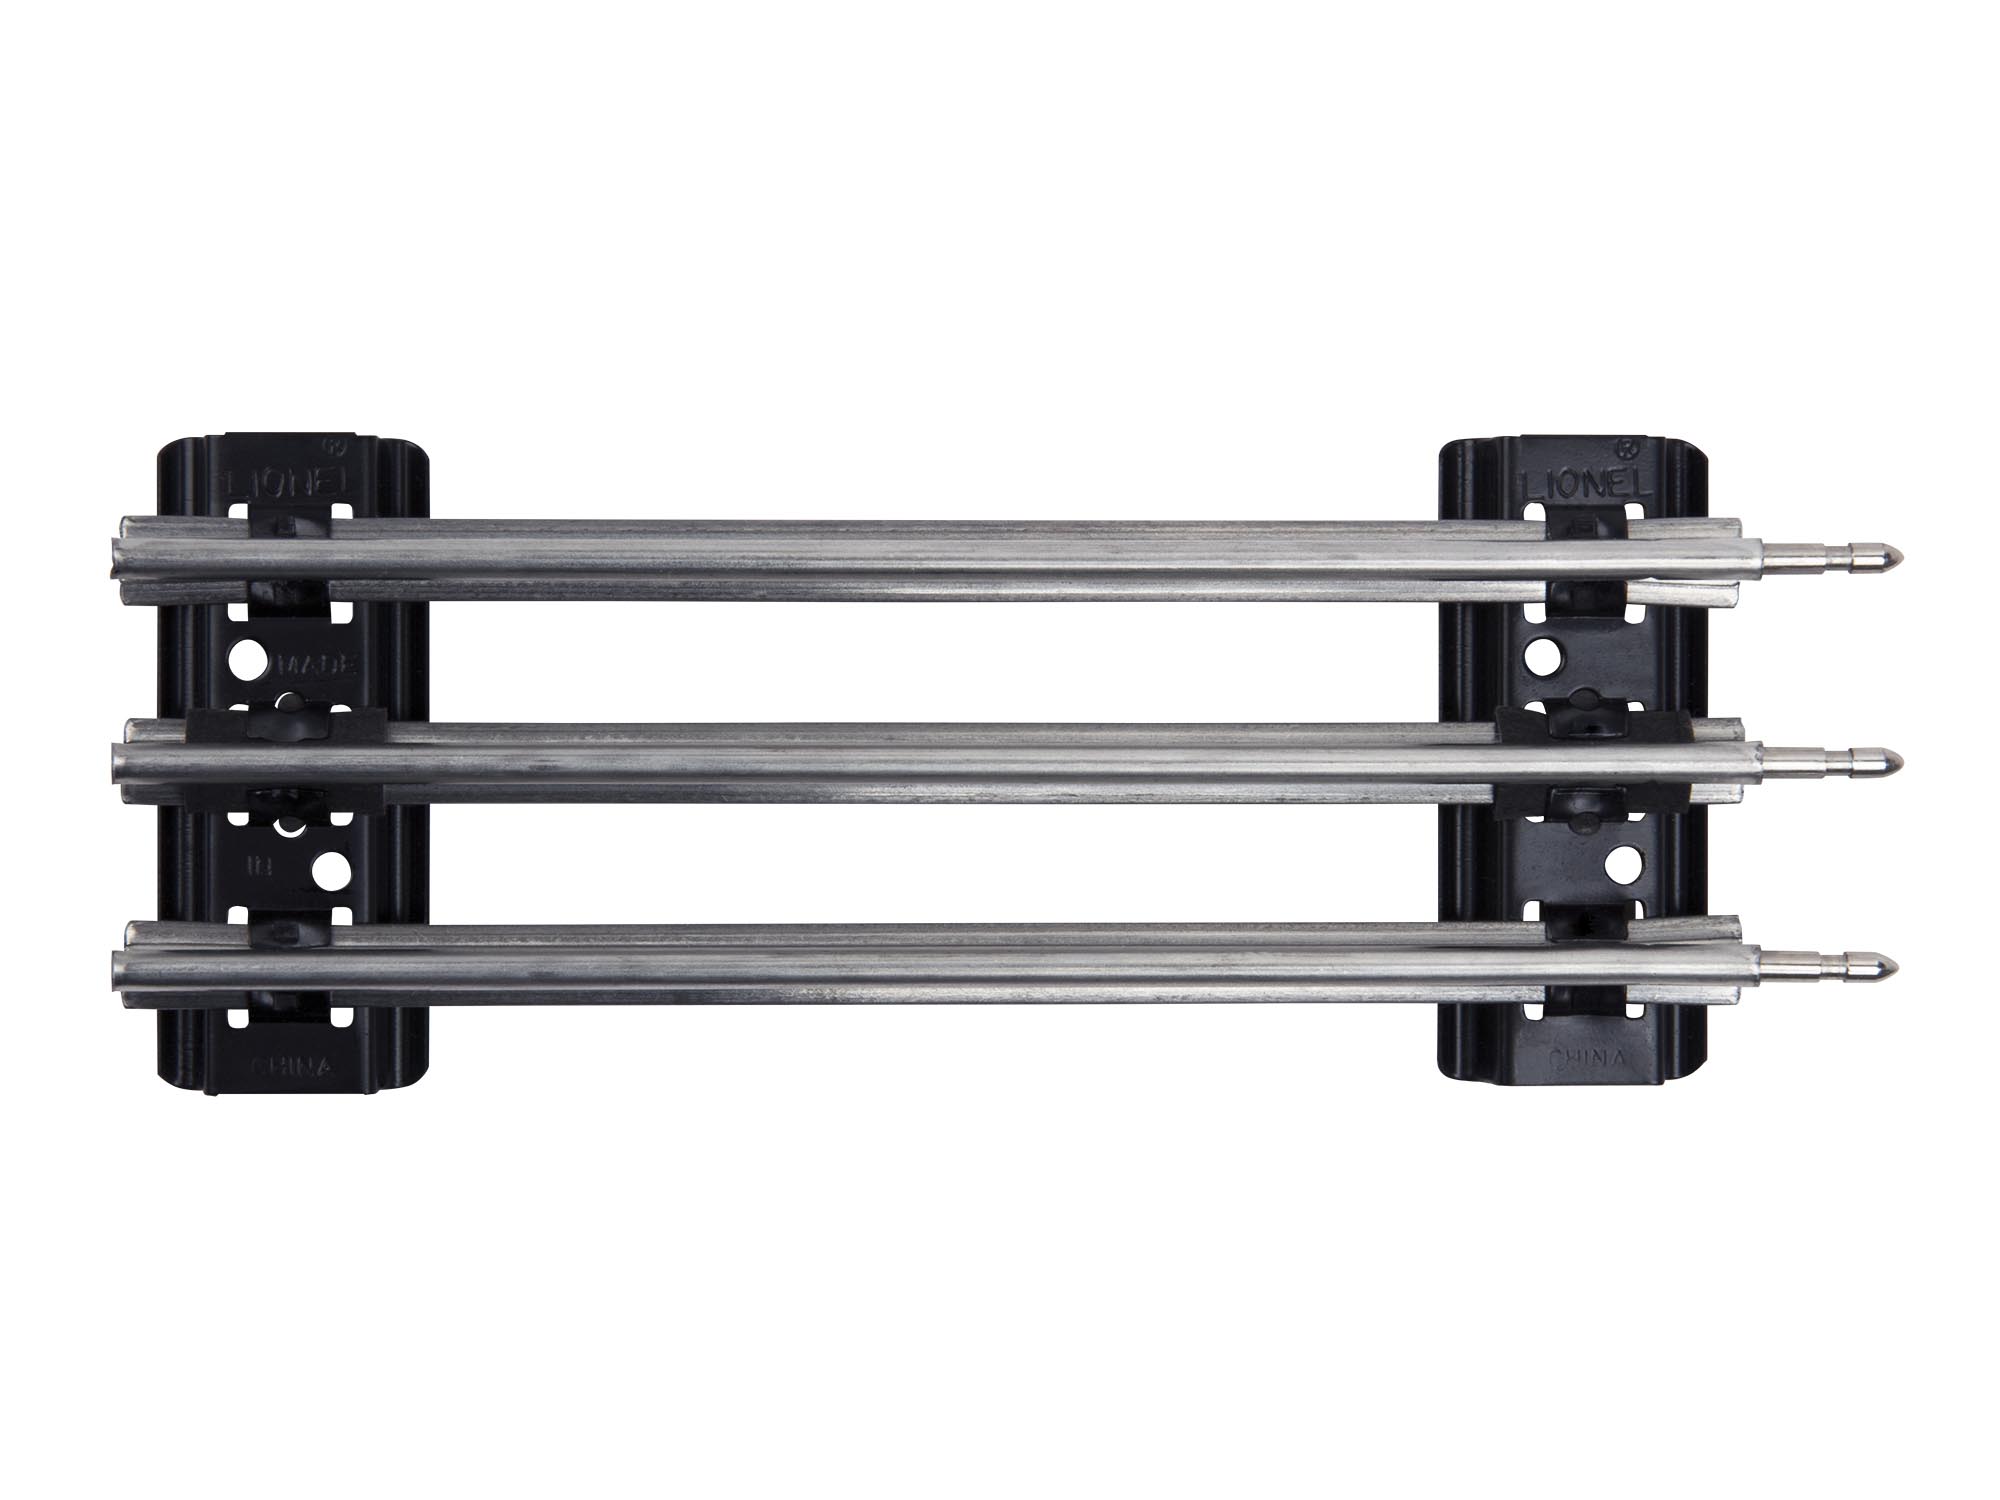 6-65505 1/2 STRAIGHT TRACK SECTION (0 GAUGE)